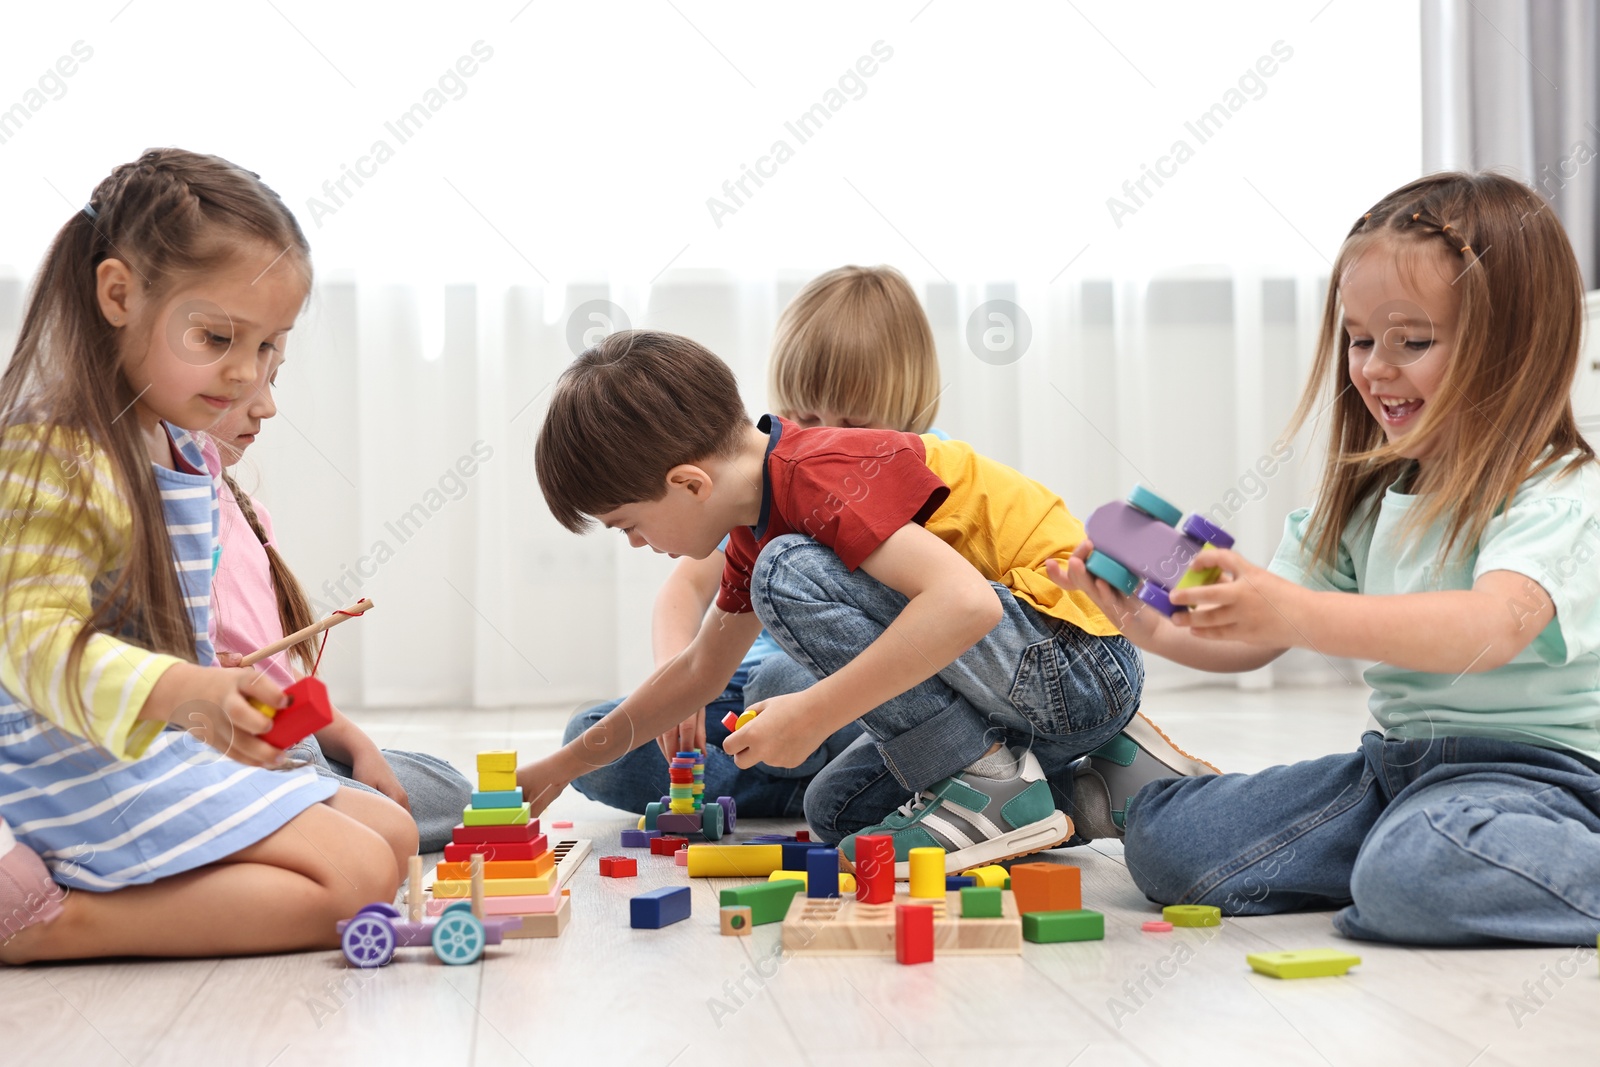 Photo of Group of children playing together on floor indoors